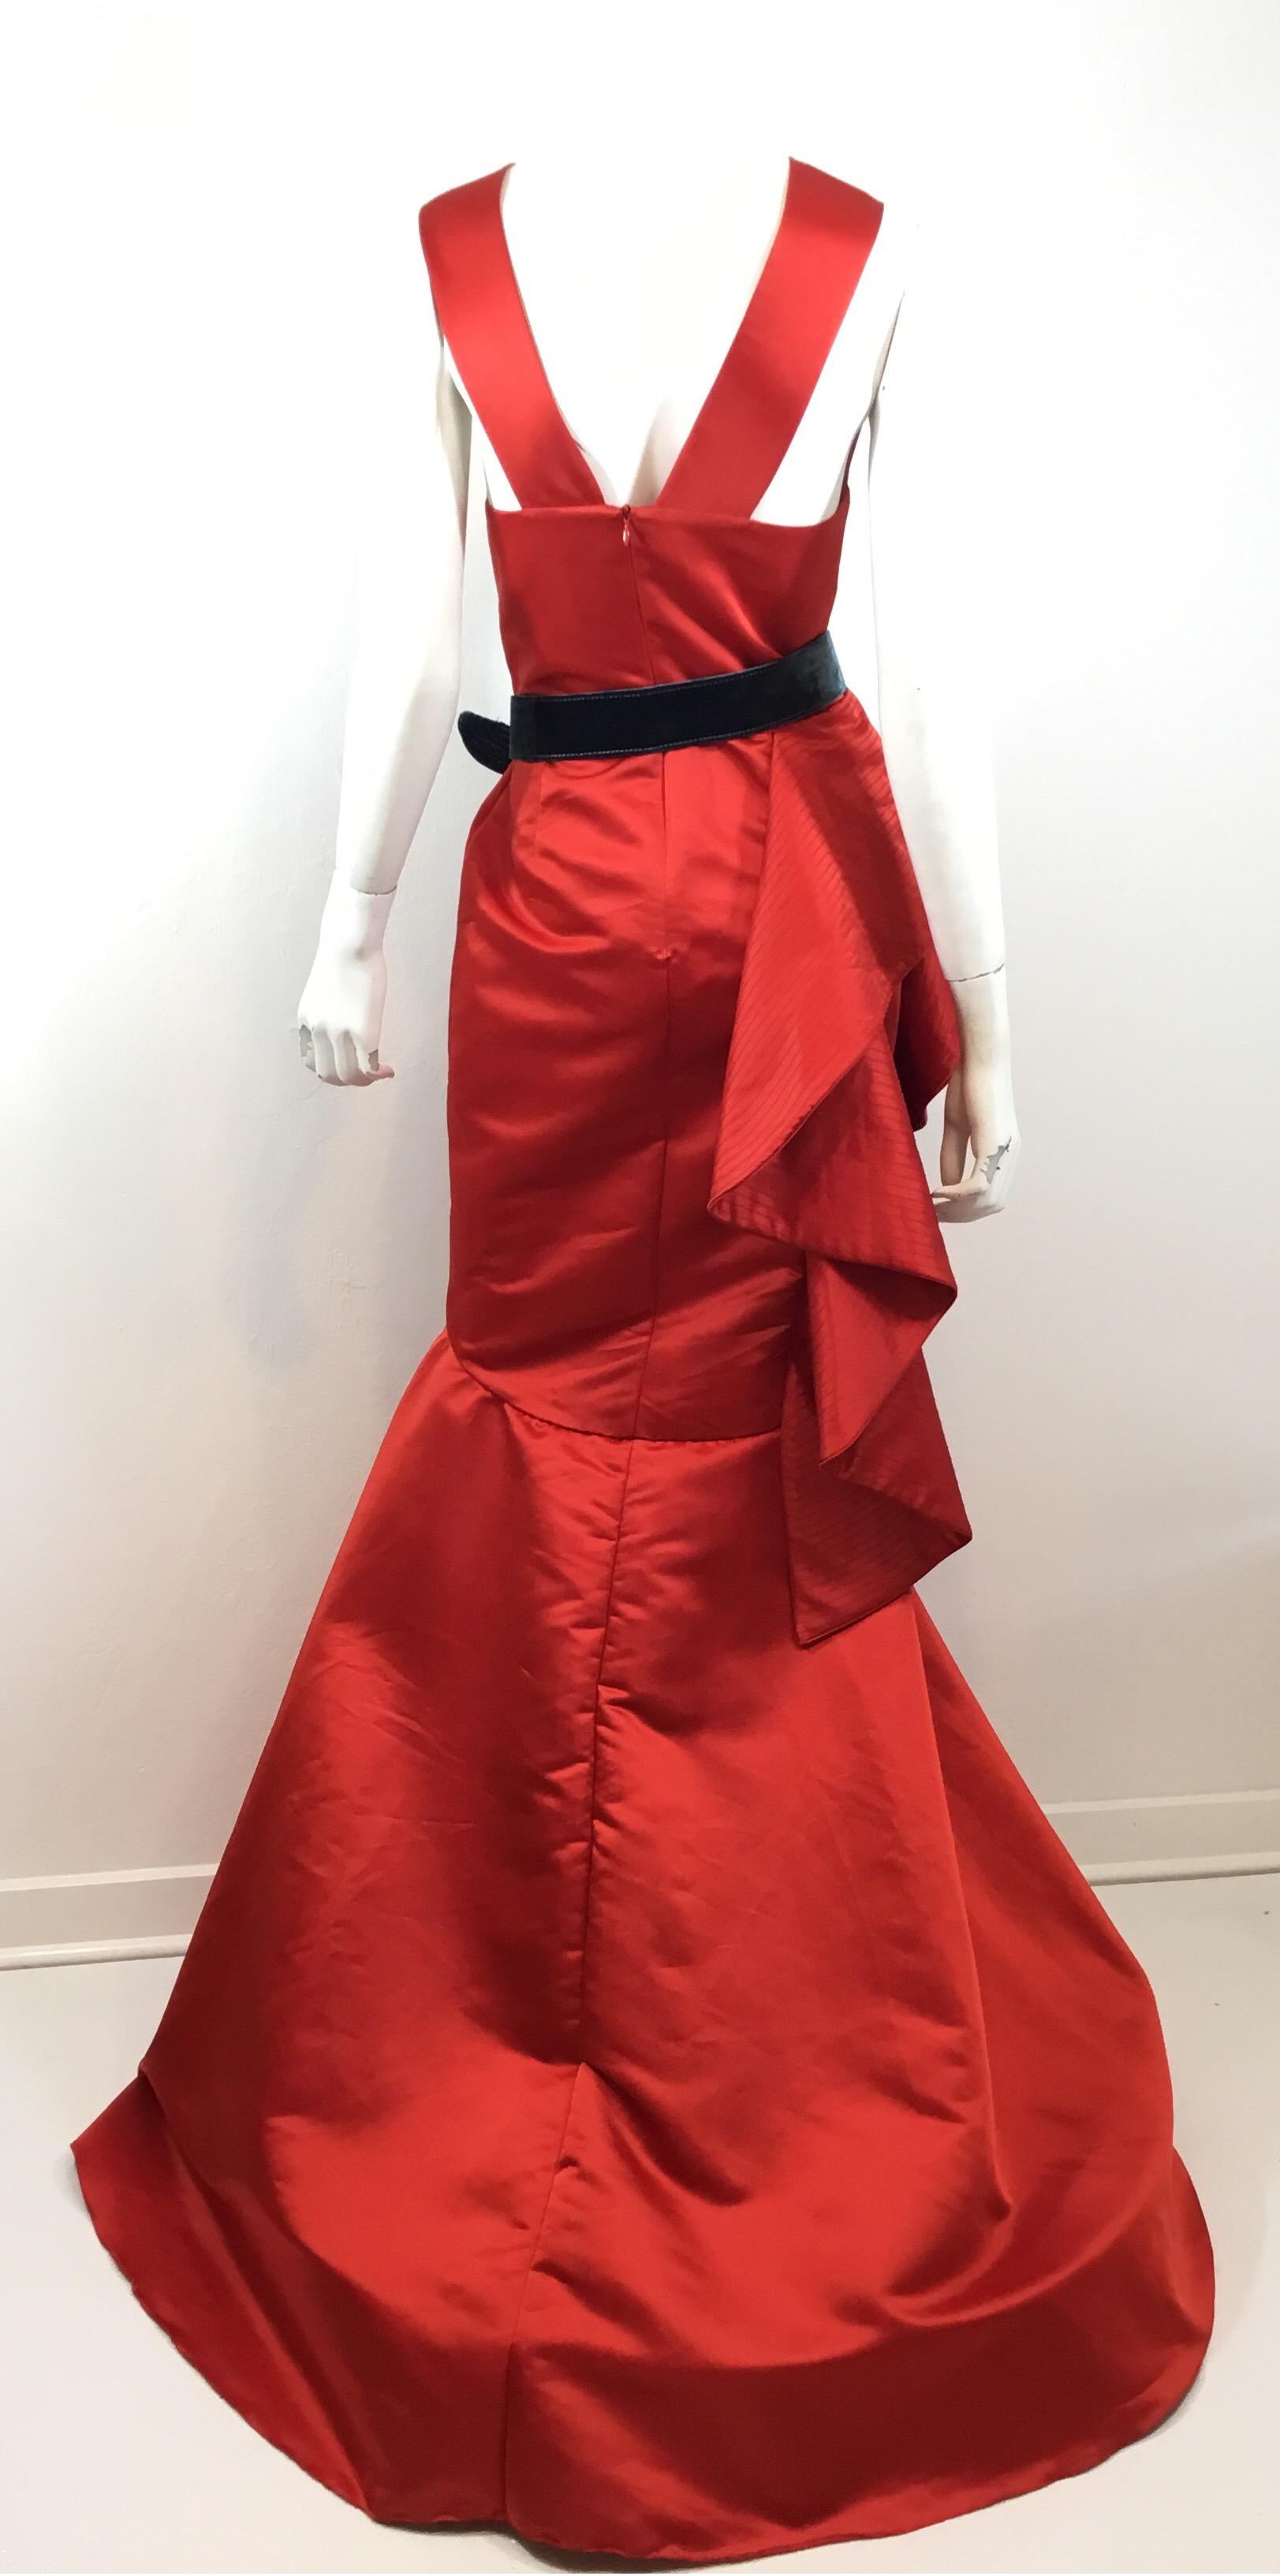 Red Johanna Ortiz Plunging Neckline Belted Gown Fall 2016